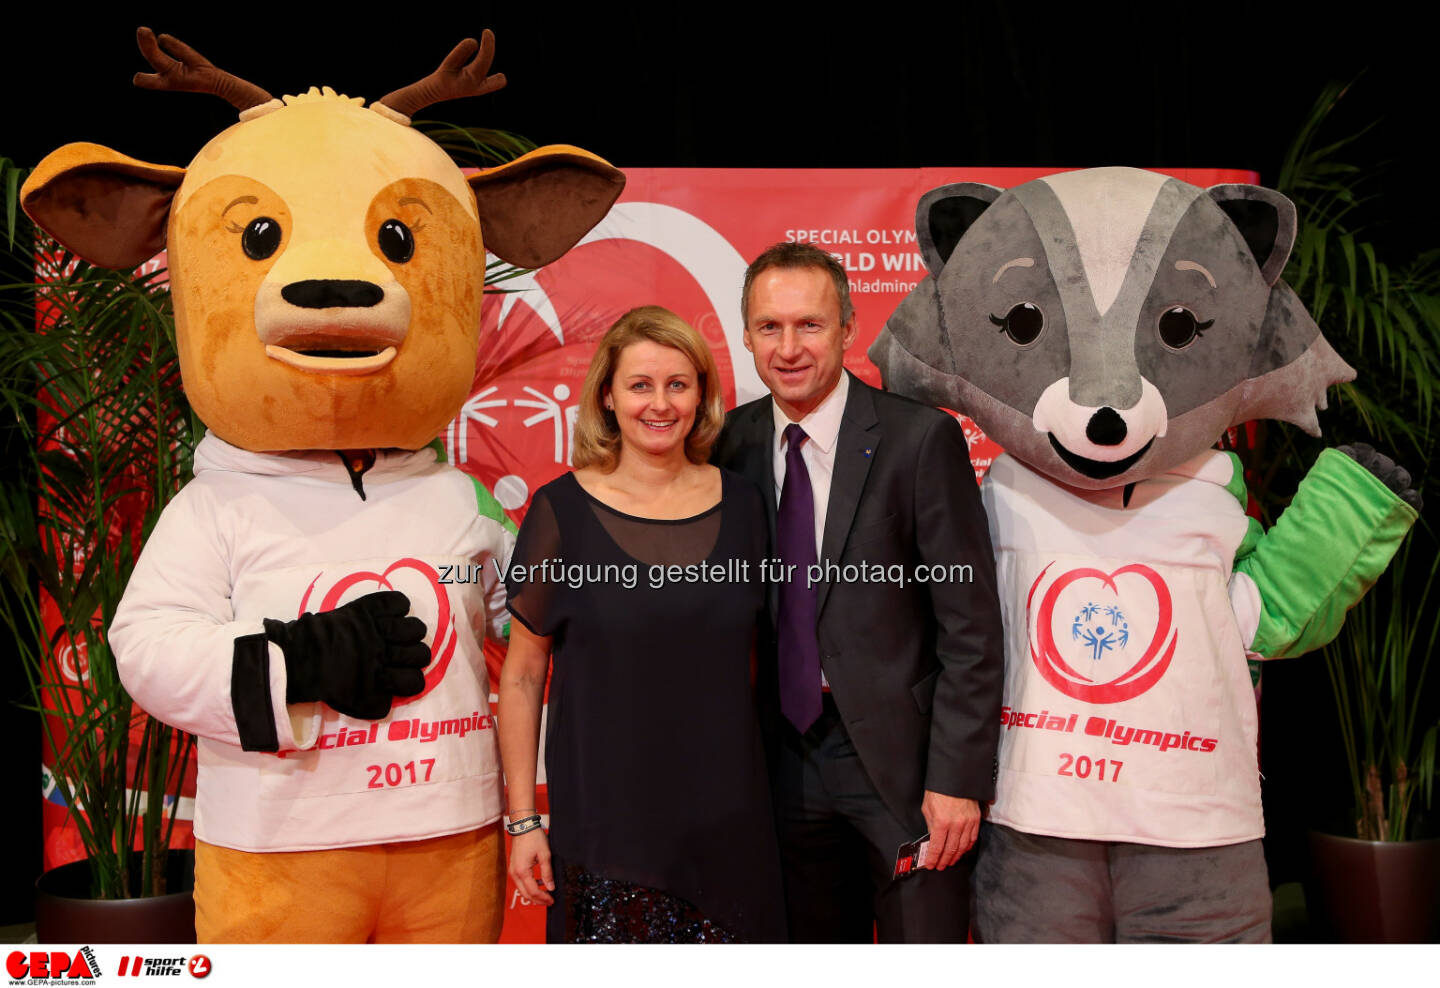 Anton Pfeffer with his wife and the mascots Luis and Lara Photo: GEPA pictures/ Christian Walgram